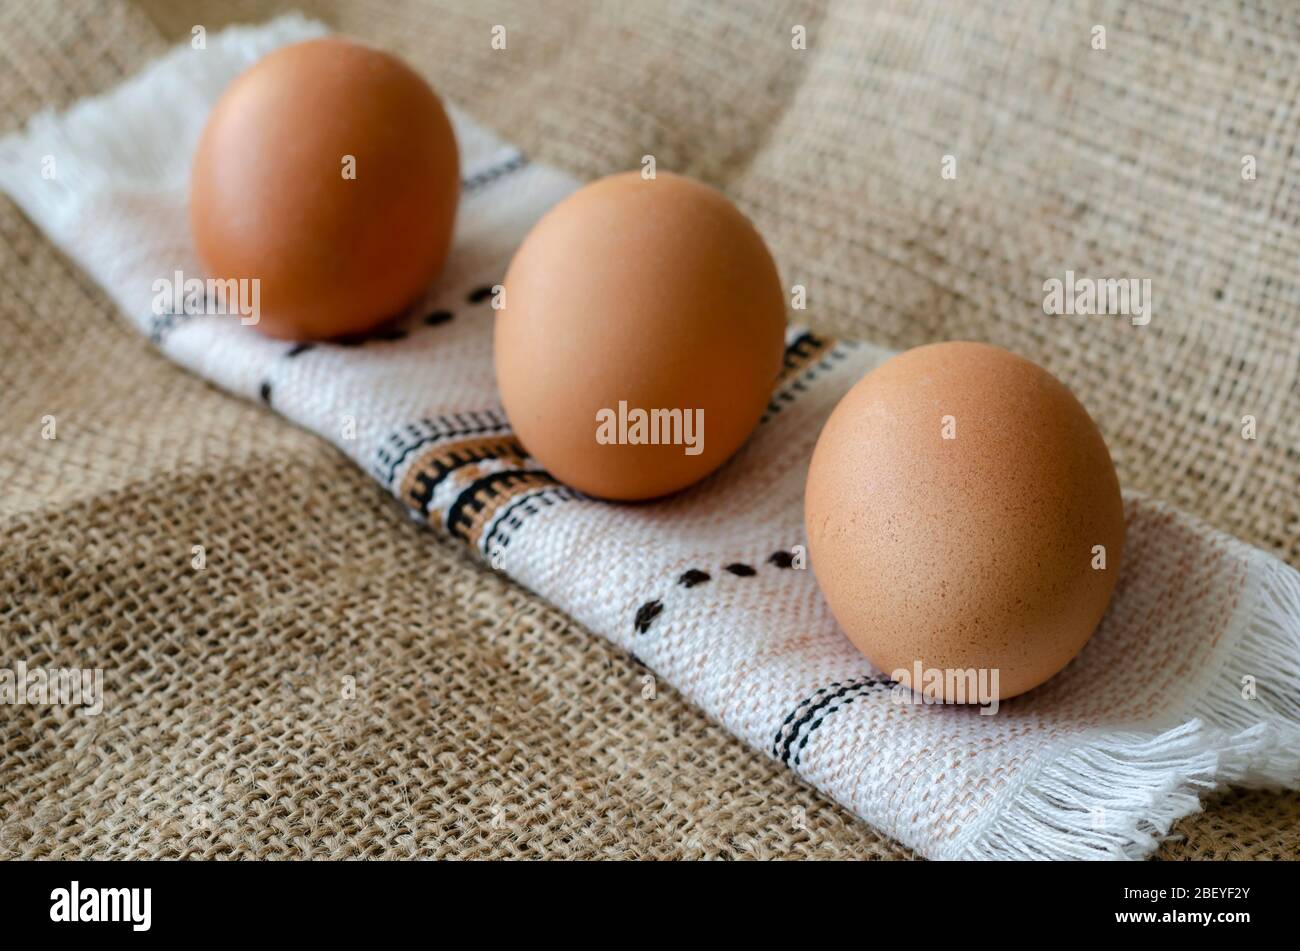 Three brown chicken eggs on burlap. A line of raw farm eggs on a rushnyk. A rolled towel with eggs on burlap. Angled side view. Close-up. Selective fo Stock Photo